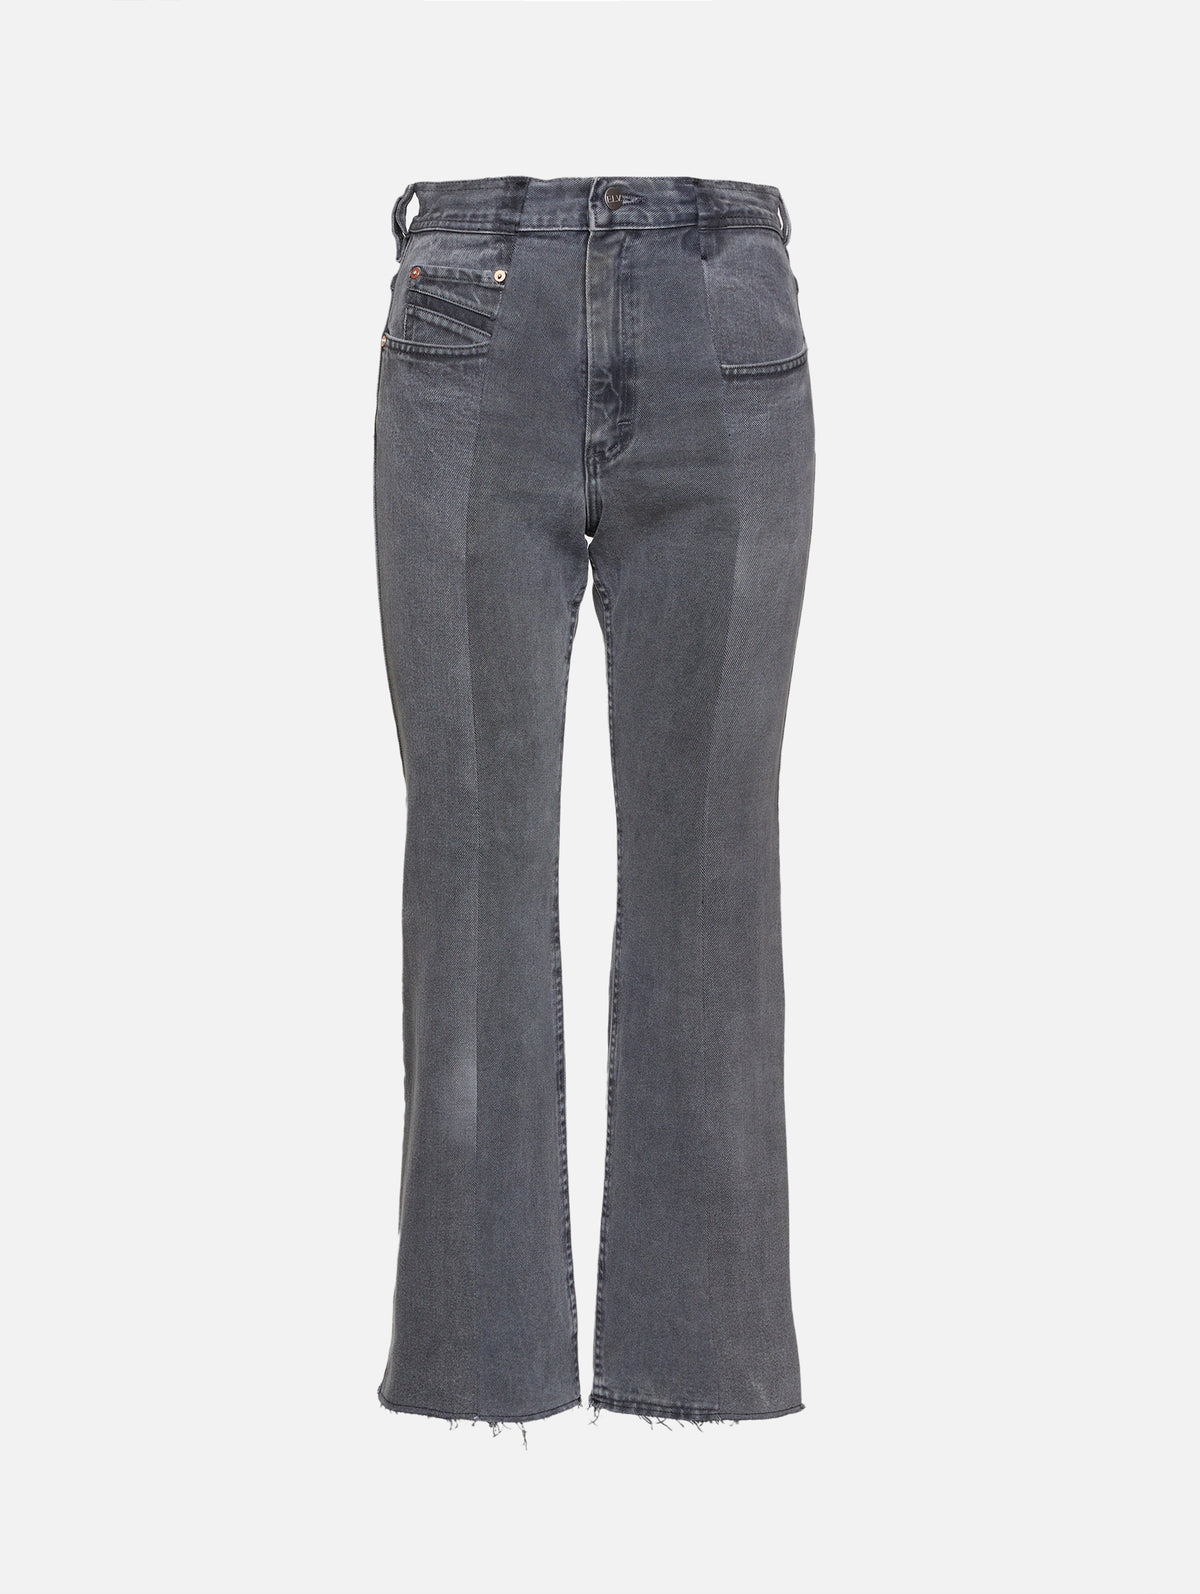 view 1 - Match Flare Jean